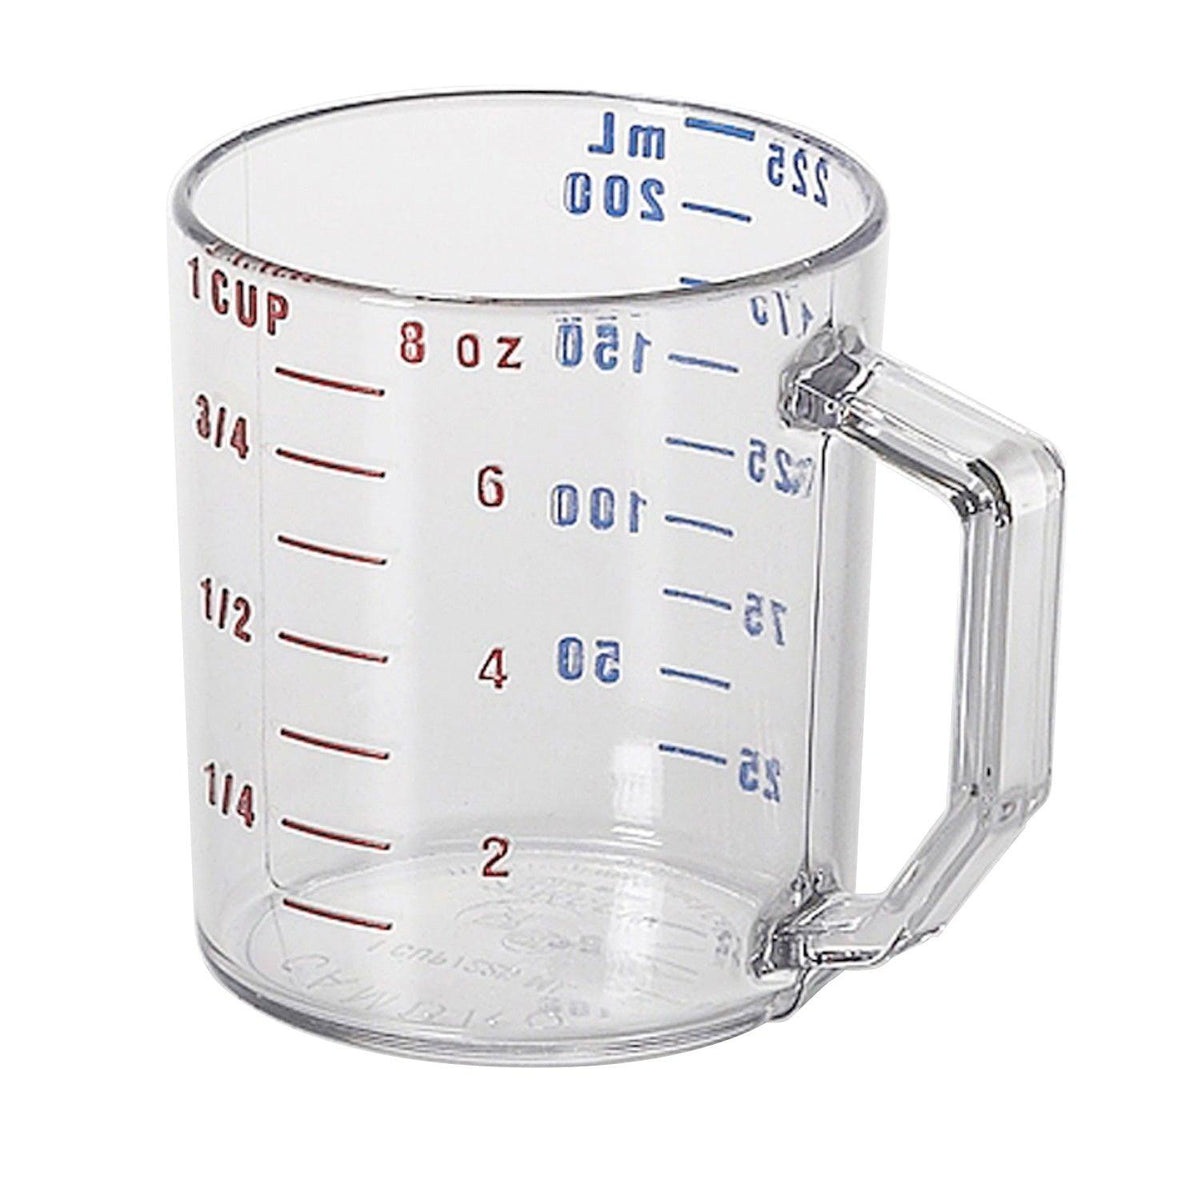 Tablecraft 725 4-Piece Stainless Steel Heavy Weight Measuring Cup Set